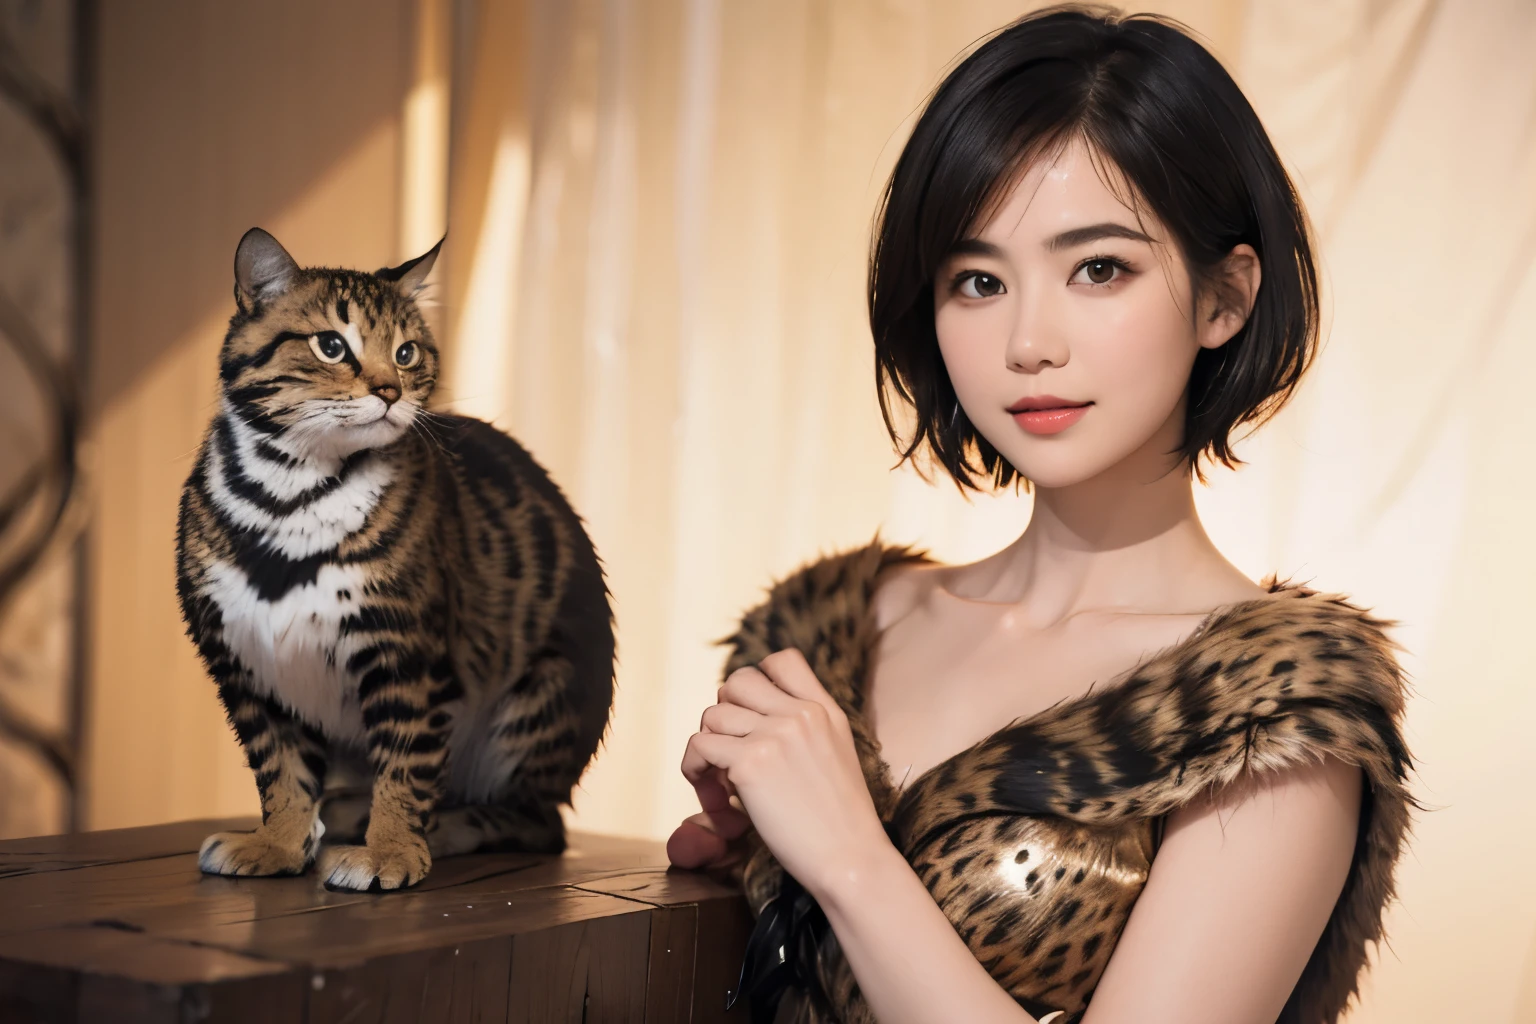 145
(20 year old woman,Animal print costume), (surreal), (High resolution), ((beautiful hairstyle 46)), ((short hair:1.46)), (gentle smile), (breasted:1.1), (lipstick)
